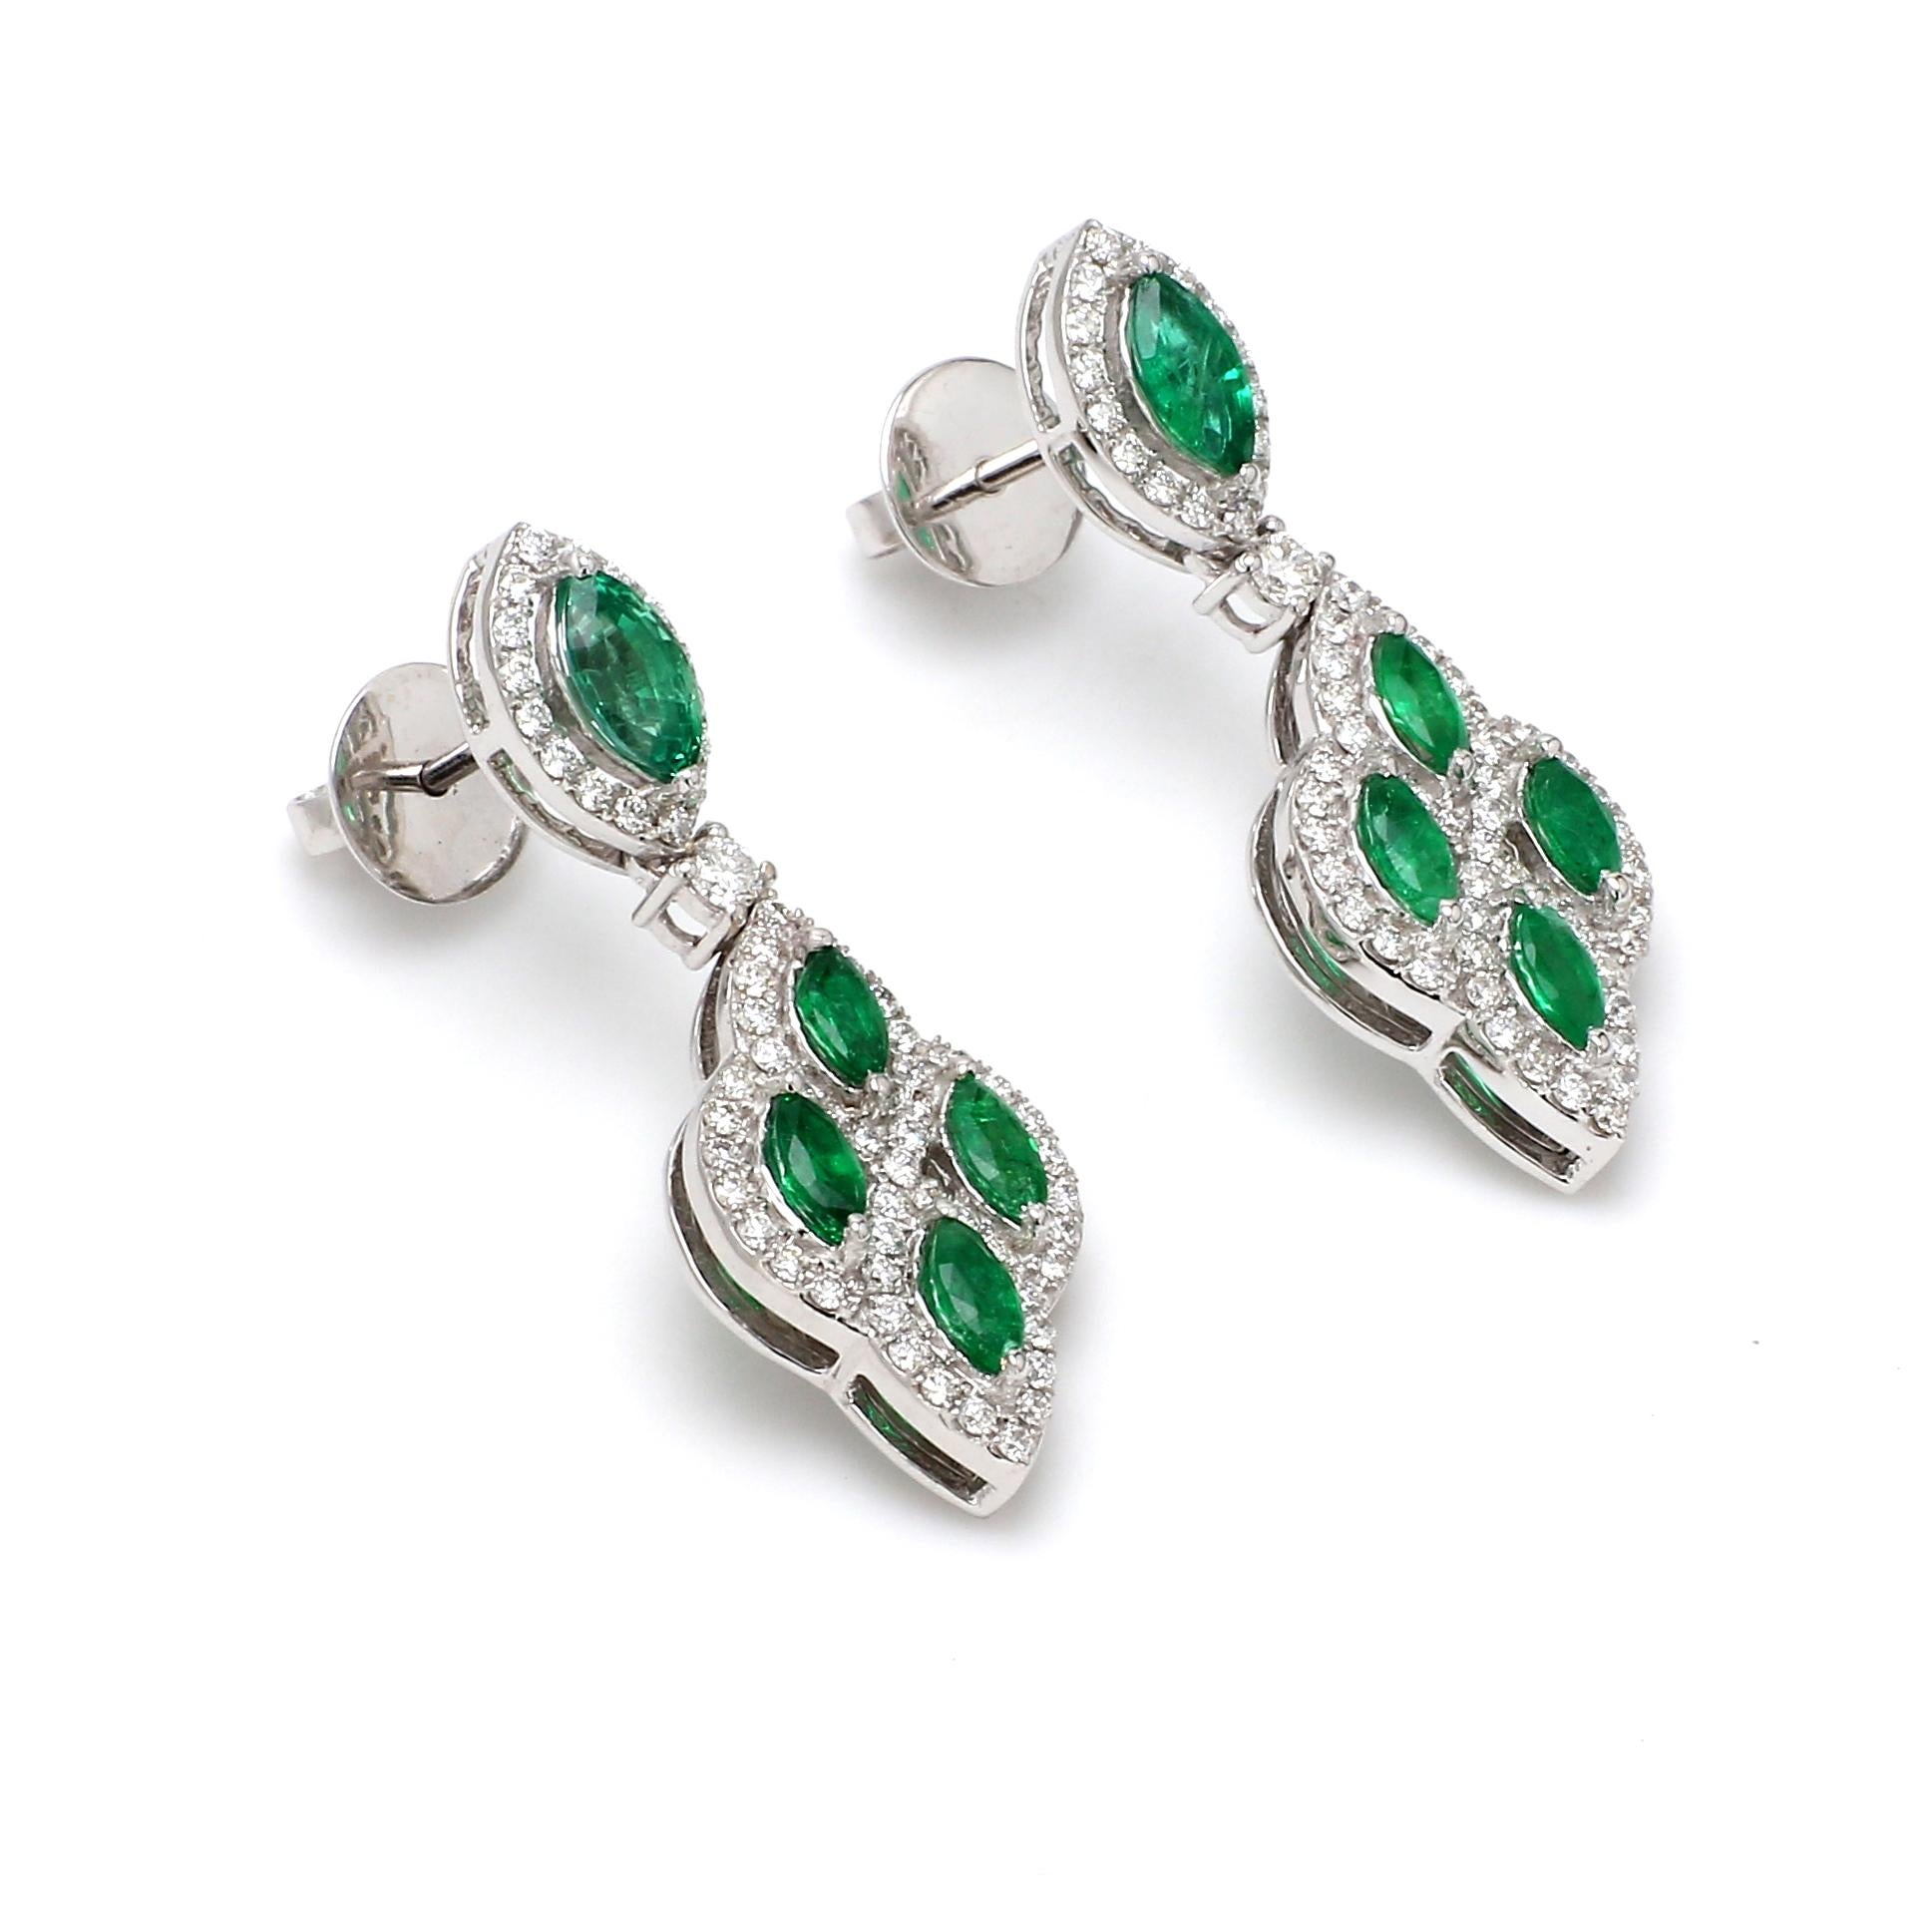 A Beautiful Handcrafted Emerald Earring in 18 karat White Gold with Old Mined Sandwana Emeralds and  Natural Brilliant Cut Colorless Diamonds. A Statement piece for Evening Wear

Emerald Details
Pieces : 10 Pieces Marquise Shape
Weight : 1.86 Carat